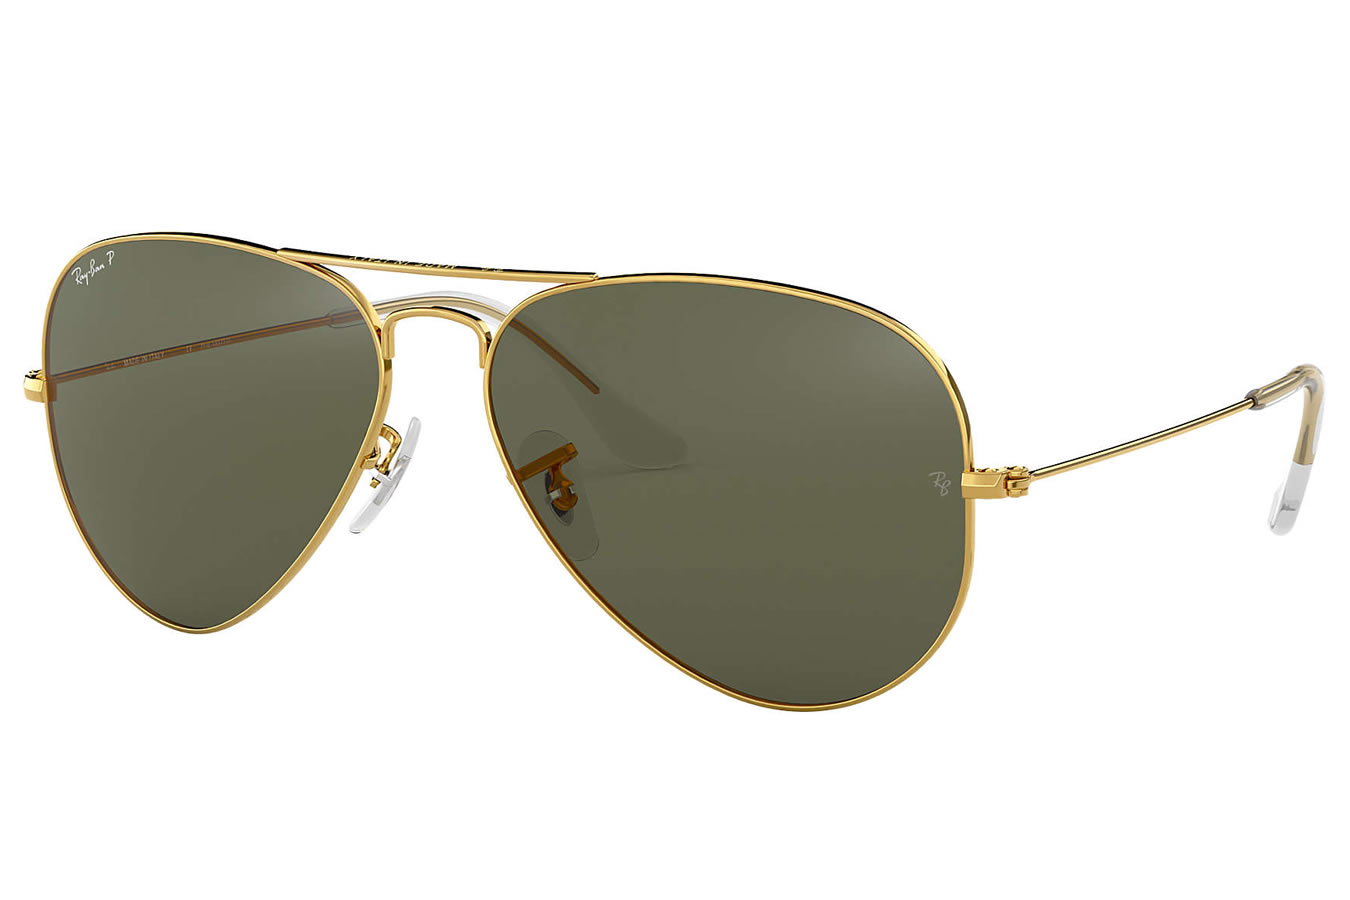 Ray Ban Aviator Classic Sunglasses With Polished Gold Frames And 